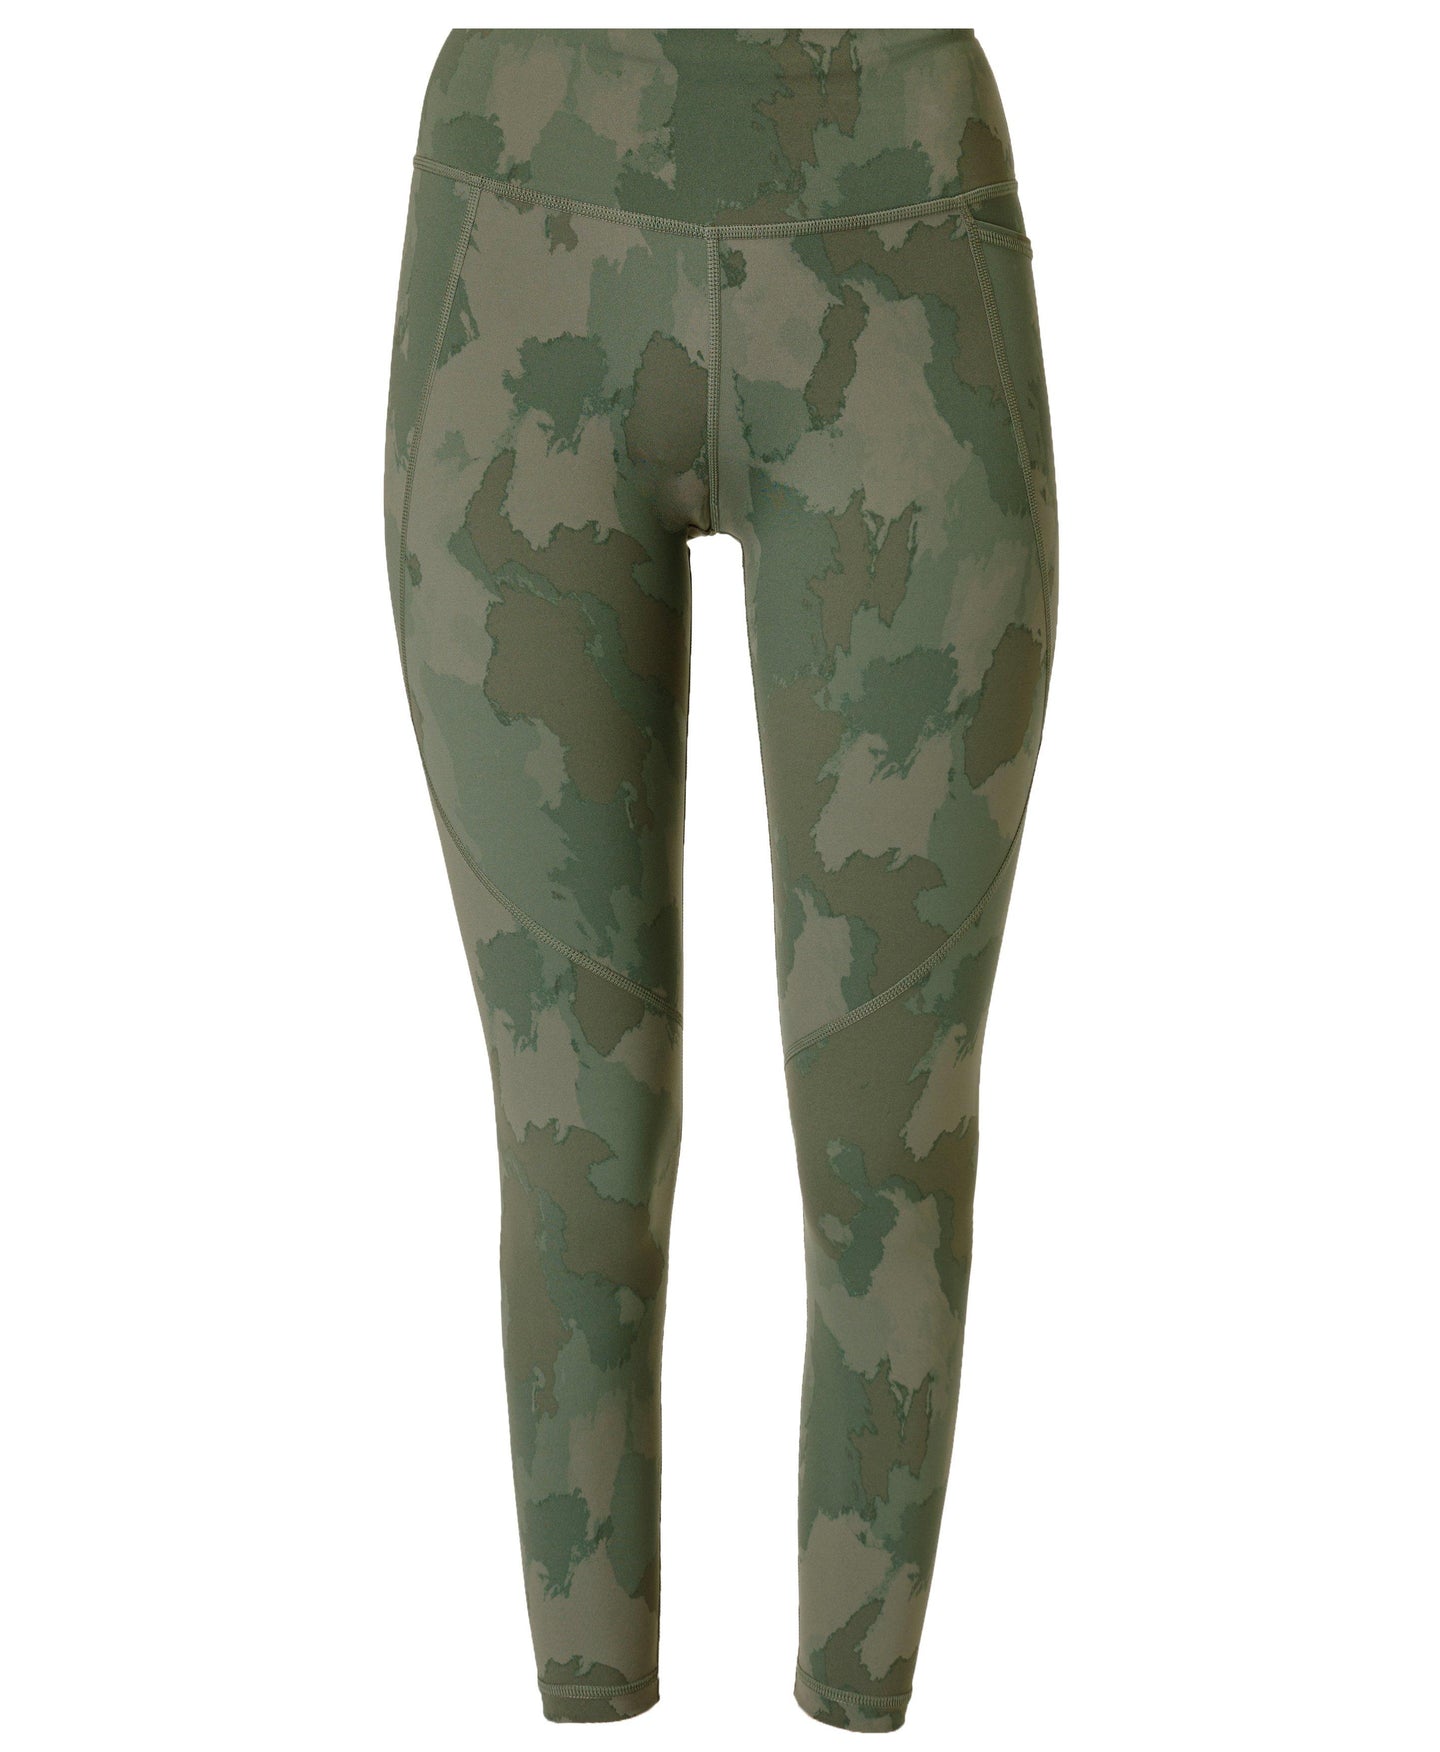 Power 7/8 Workout Leggings Sb5400a 78 Green-Painted-Camo-P